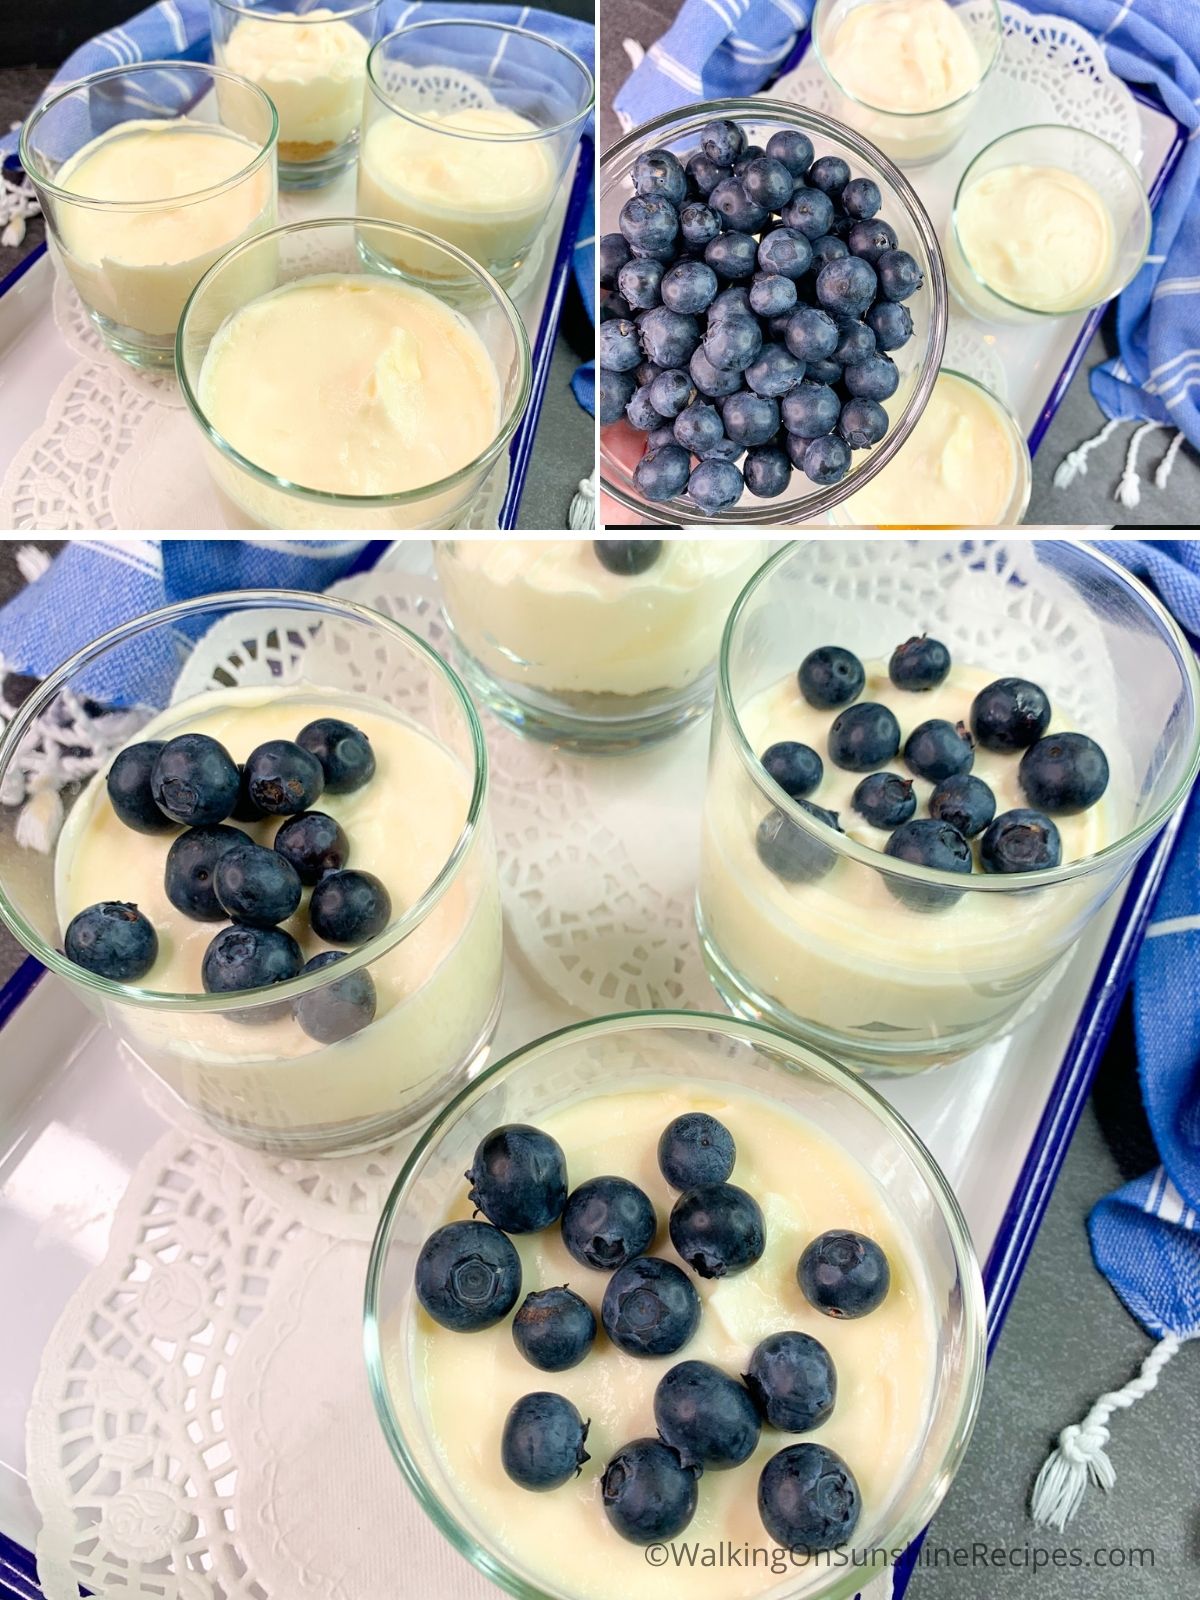 Add cream cheesecake mixture to cups and top with blueberries.